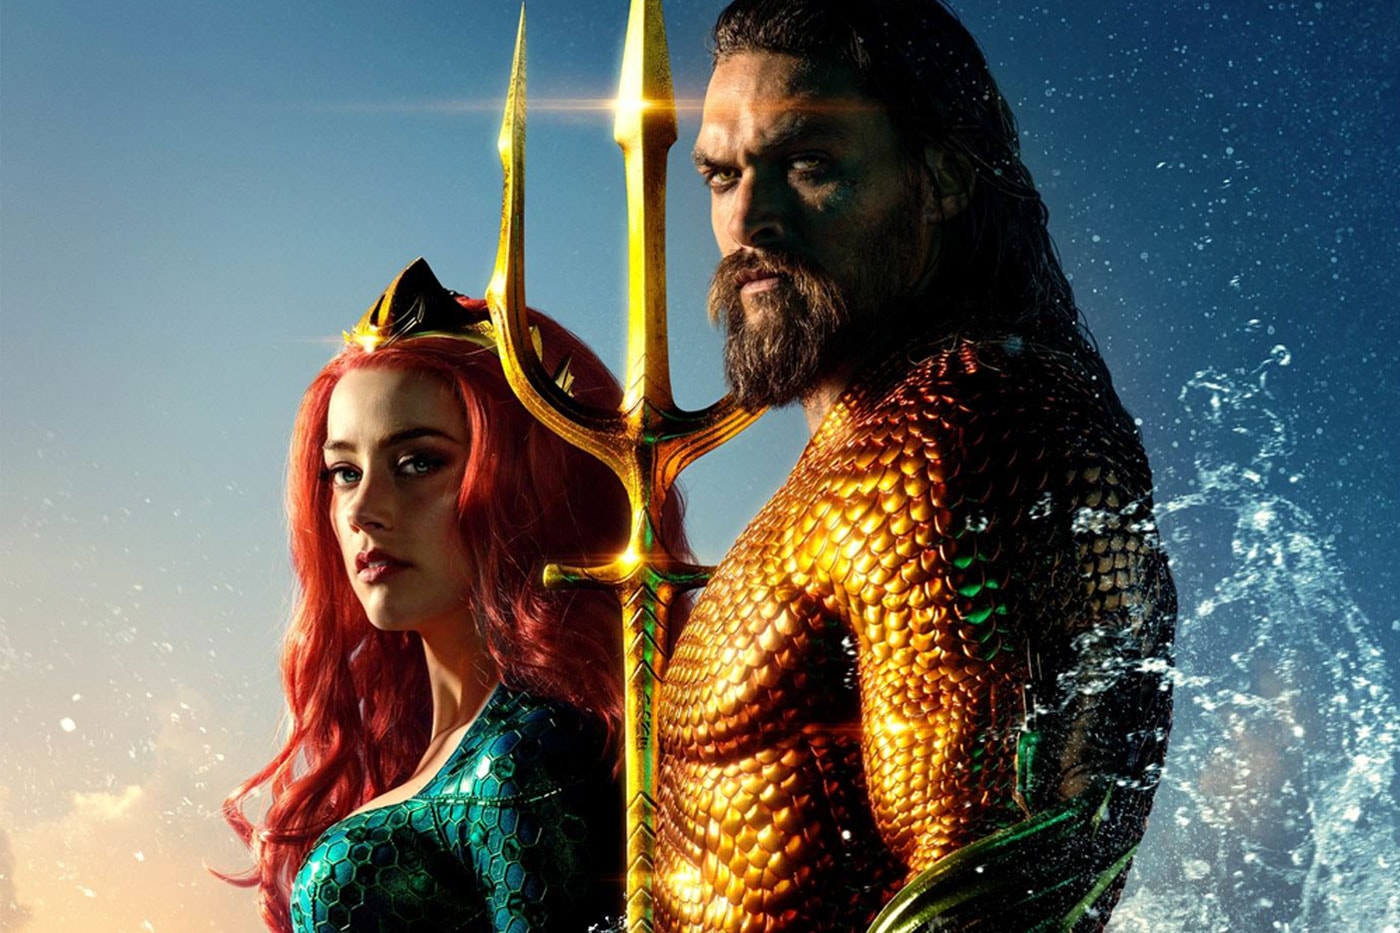 'Aquaman 2' Plot Details Revealed Regarding How DC Films Planned To Reduce Amber Heard's Role johnny depp jason momoa mera aquaman and the lost kingdom kathryn arnold dceu arthur curry